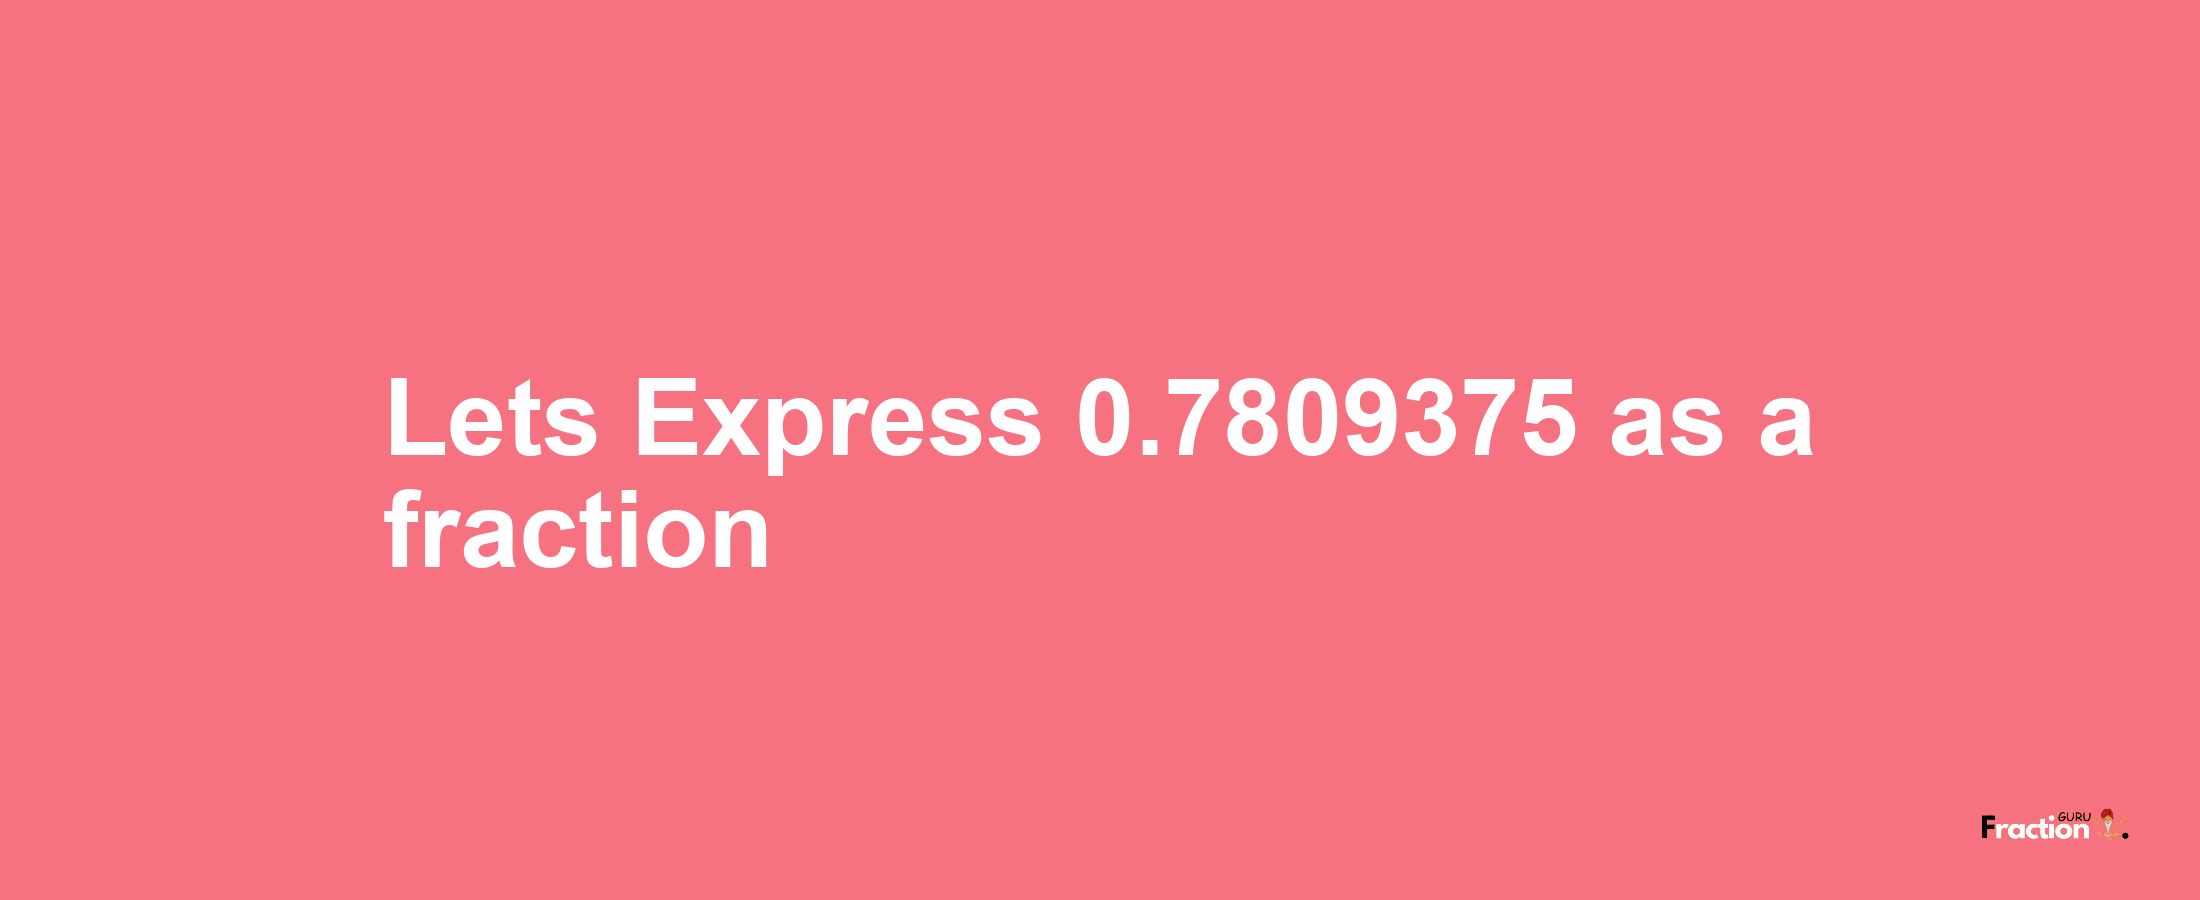 Lets Express 0.7809375 as afraction